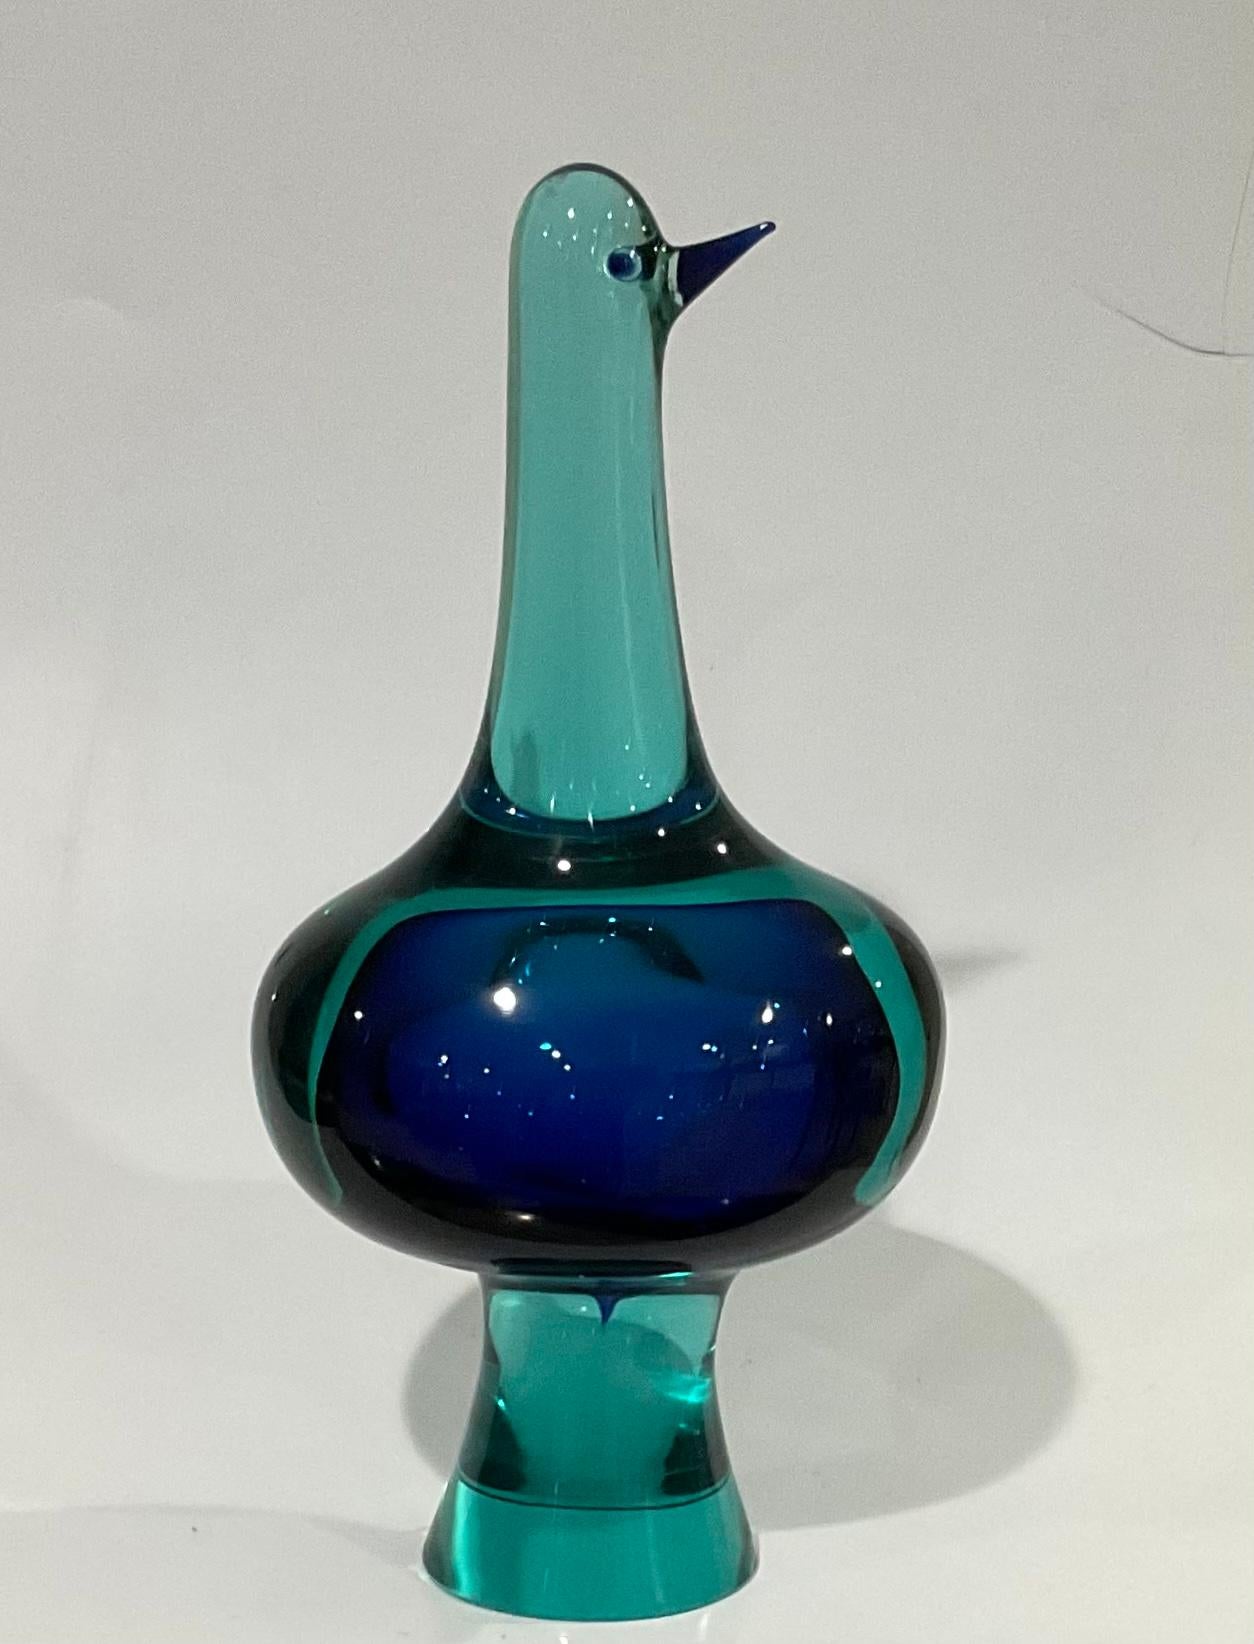 Large Antonio Da Ros Cenedese Murano Sommerso glass figure of a bird in vibrant Blue. Iconic mid century design. Very high quality sculpture worthy of any art glass collection.